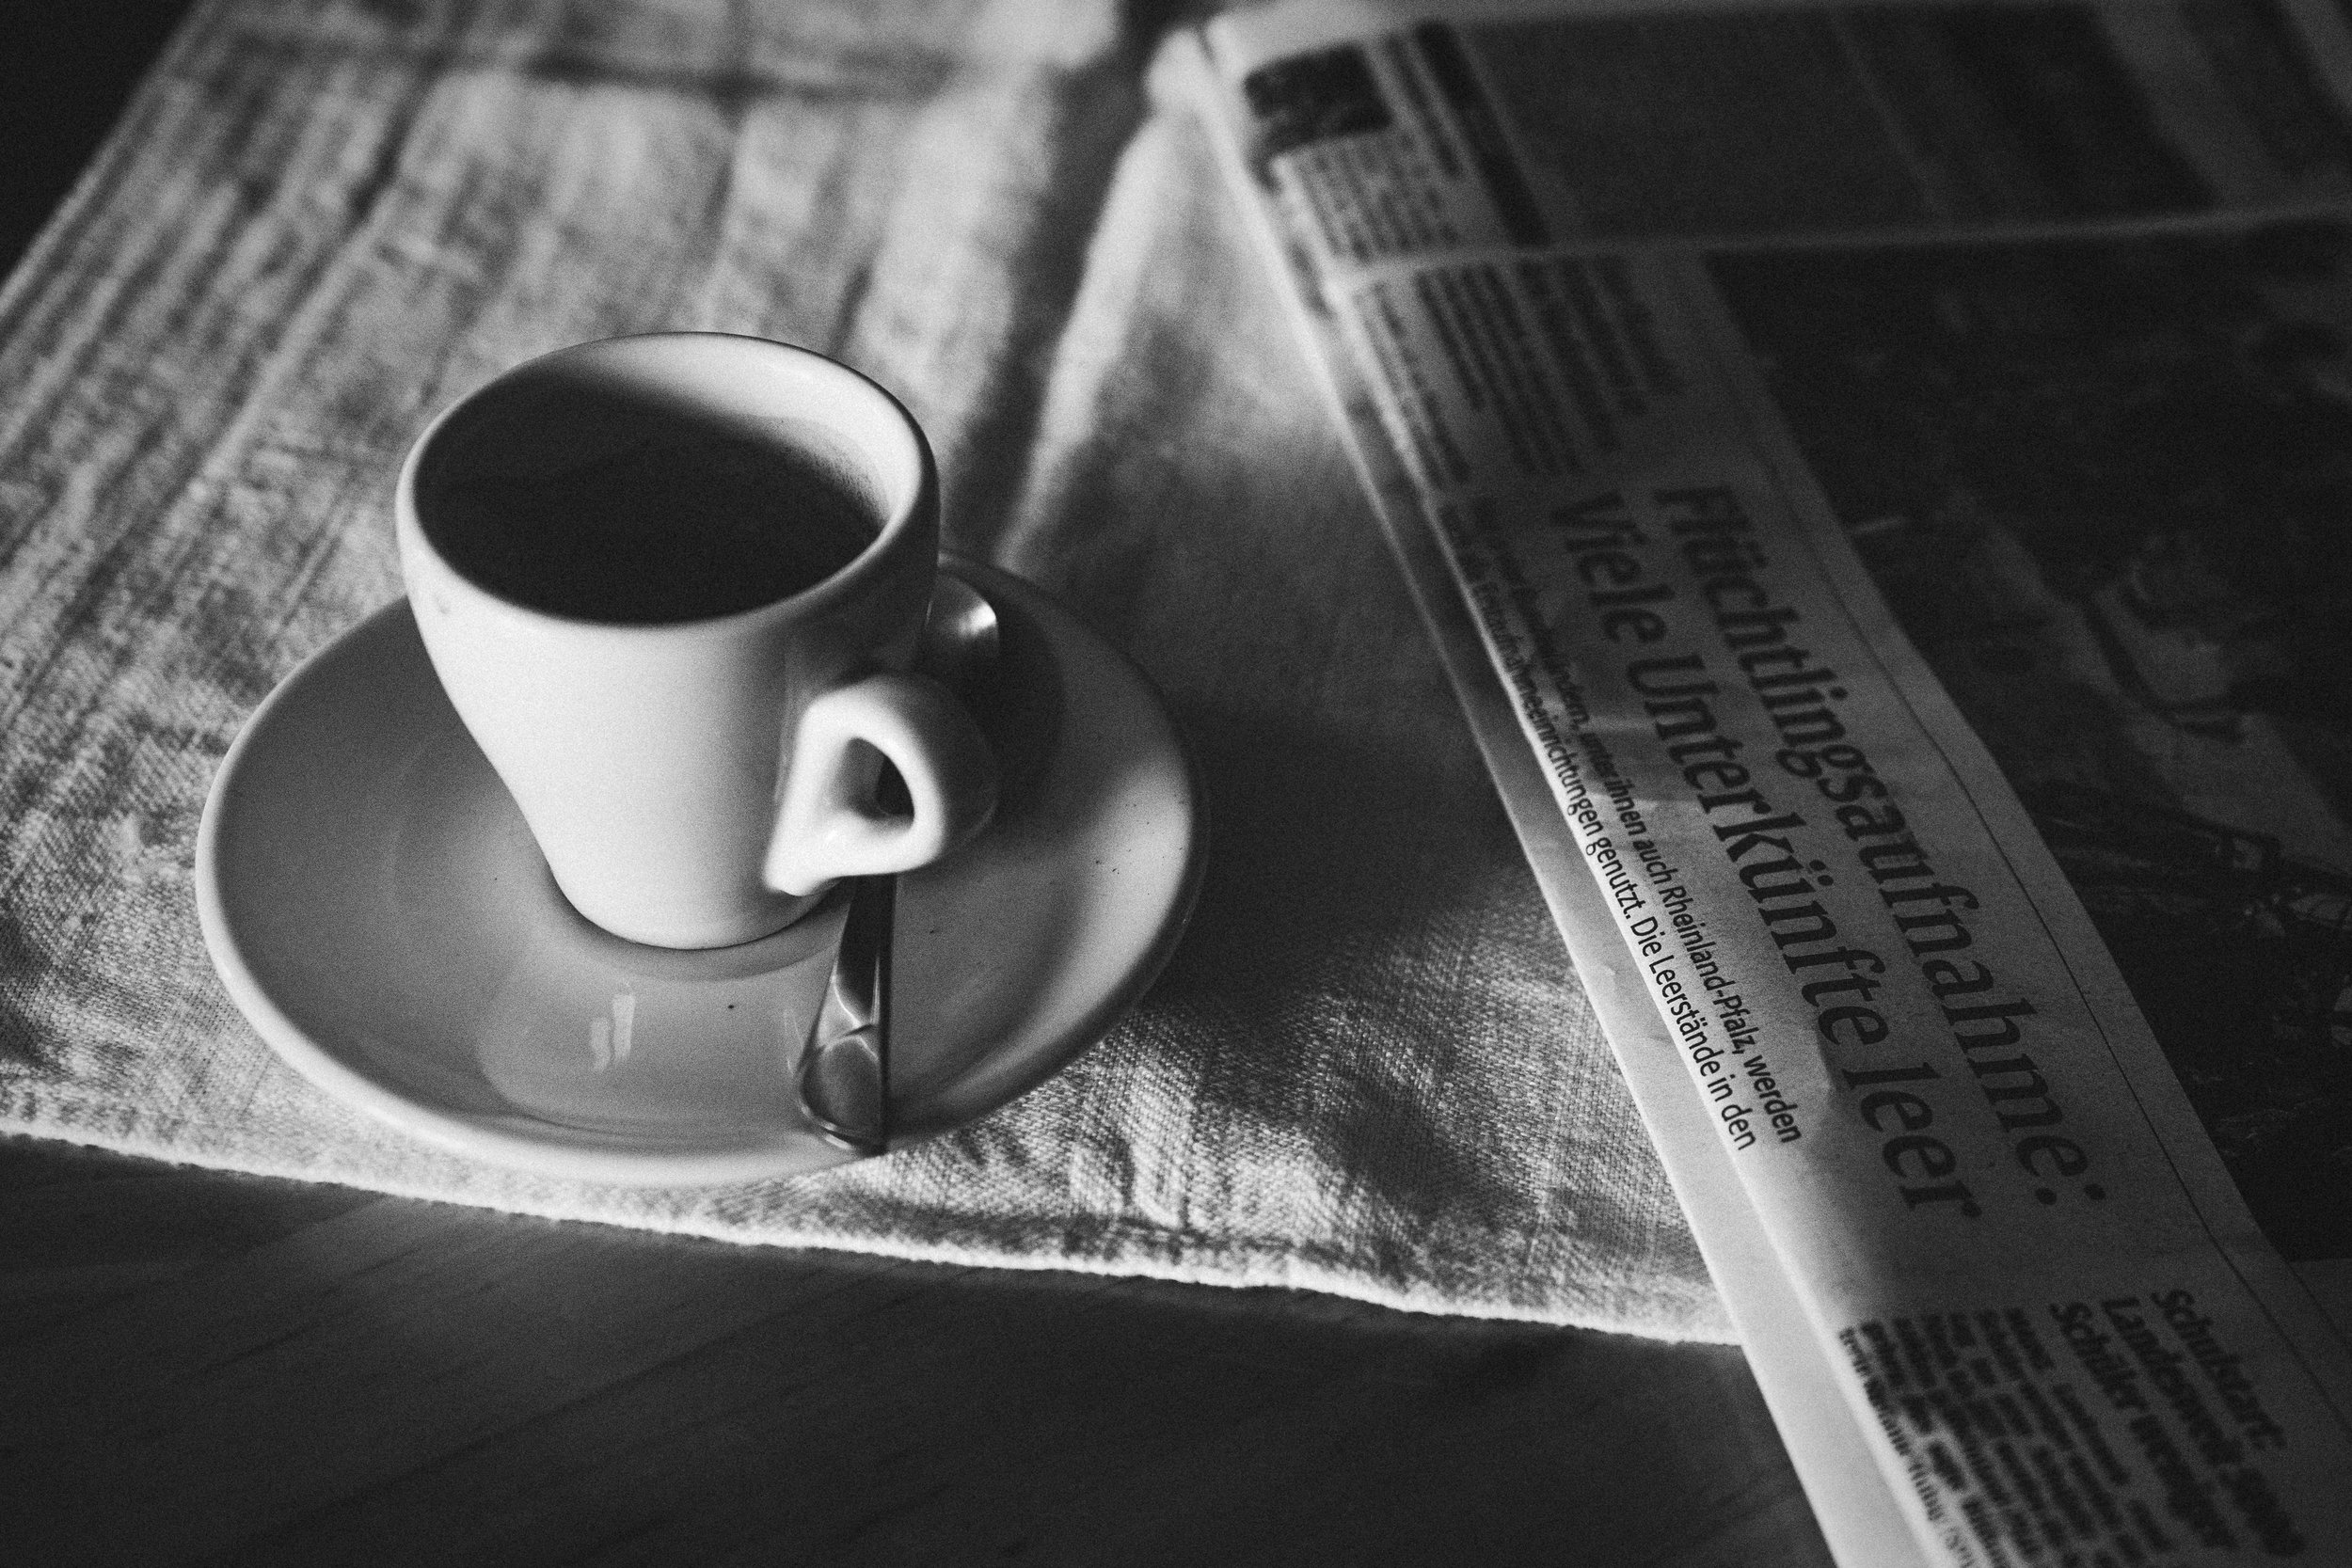 An espresso cup sits on a tablecloth next to a newspaper